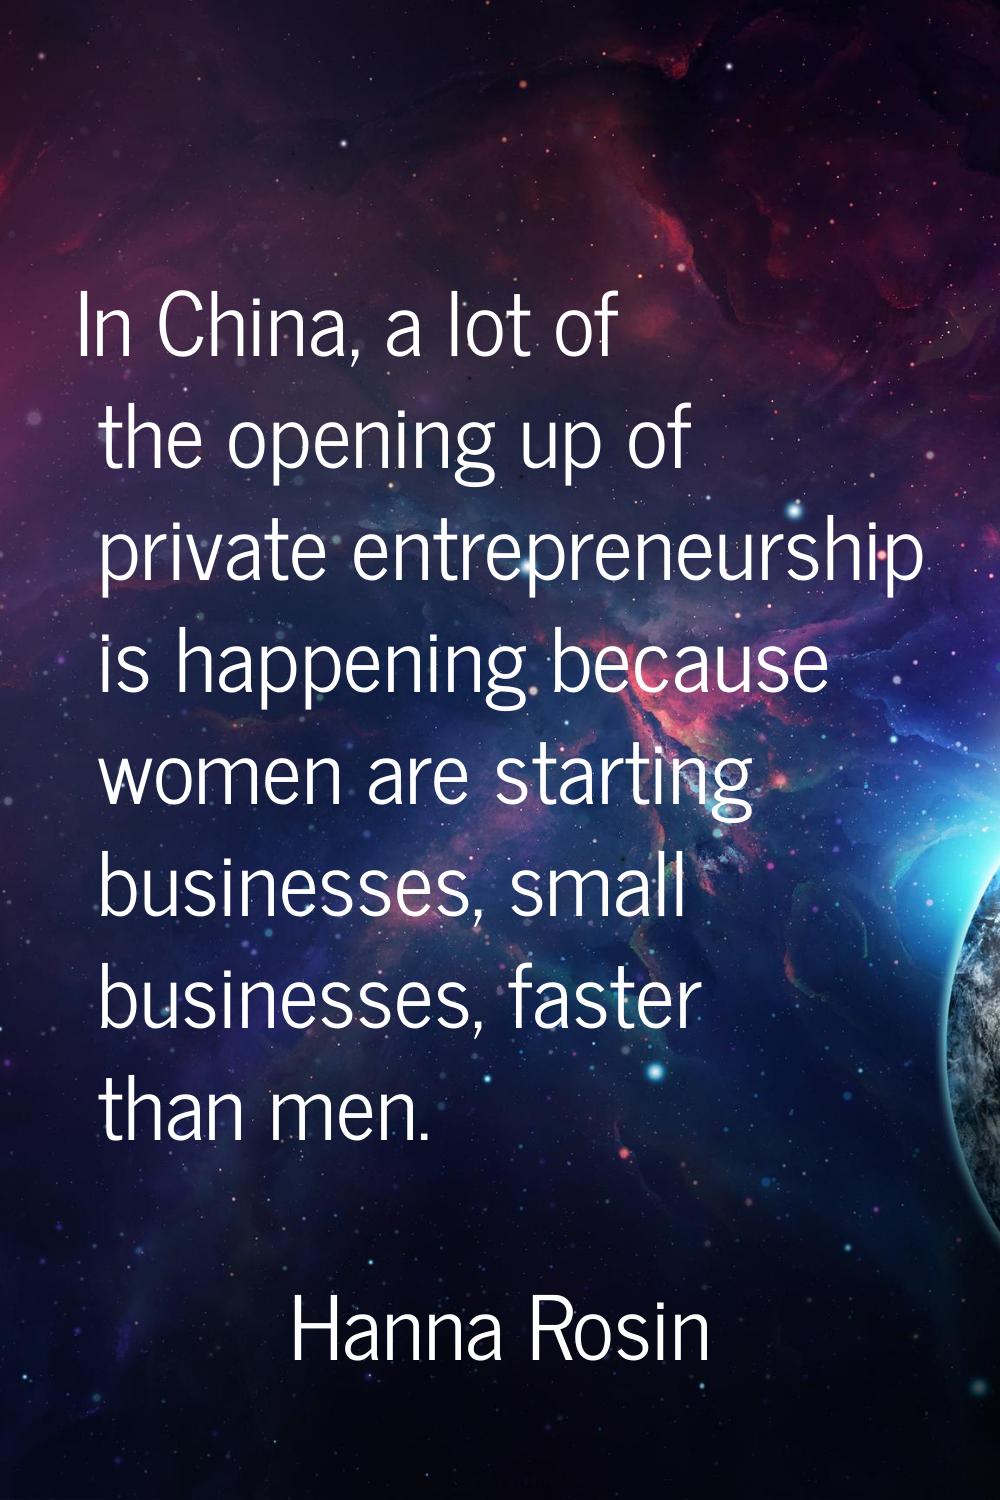 In China, a lot of the opening up of private entrepreneurship is happening because women are starti